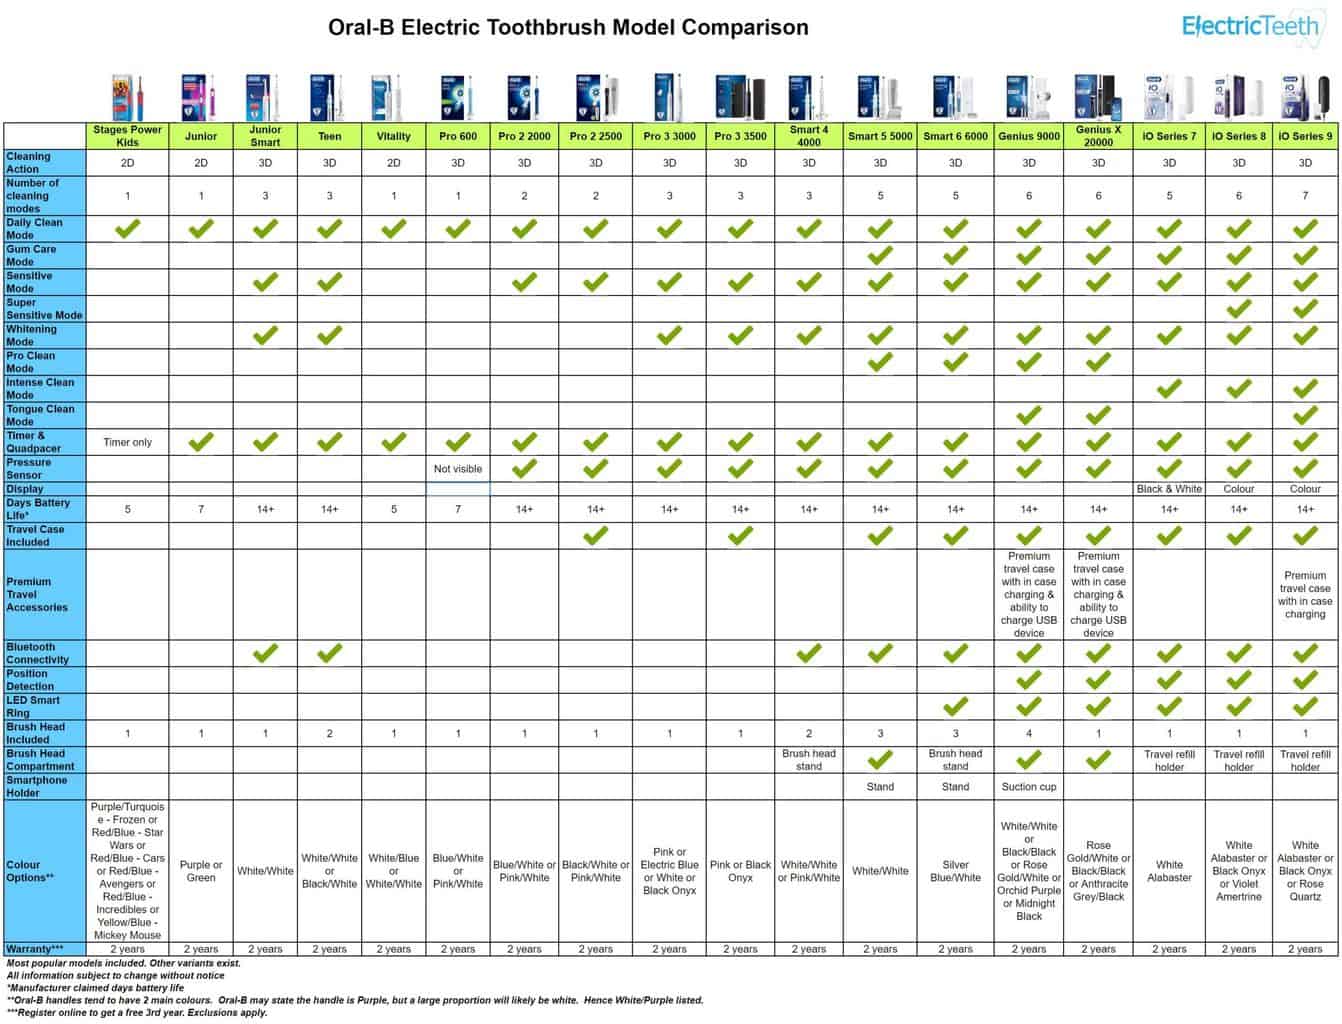 Yoghurt gisteren Geweldig Oral-B Electric Toothbrush Comparison (Chart Included)